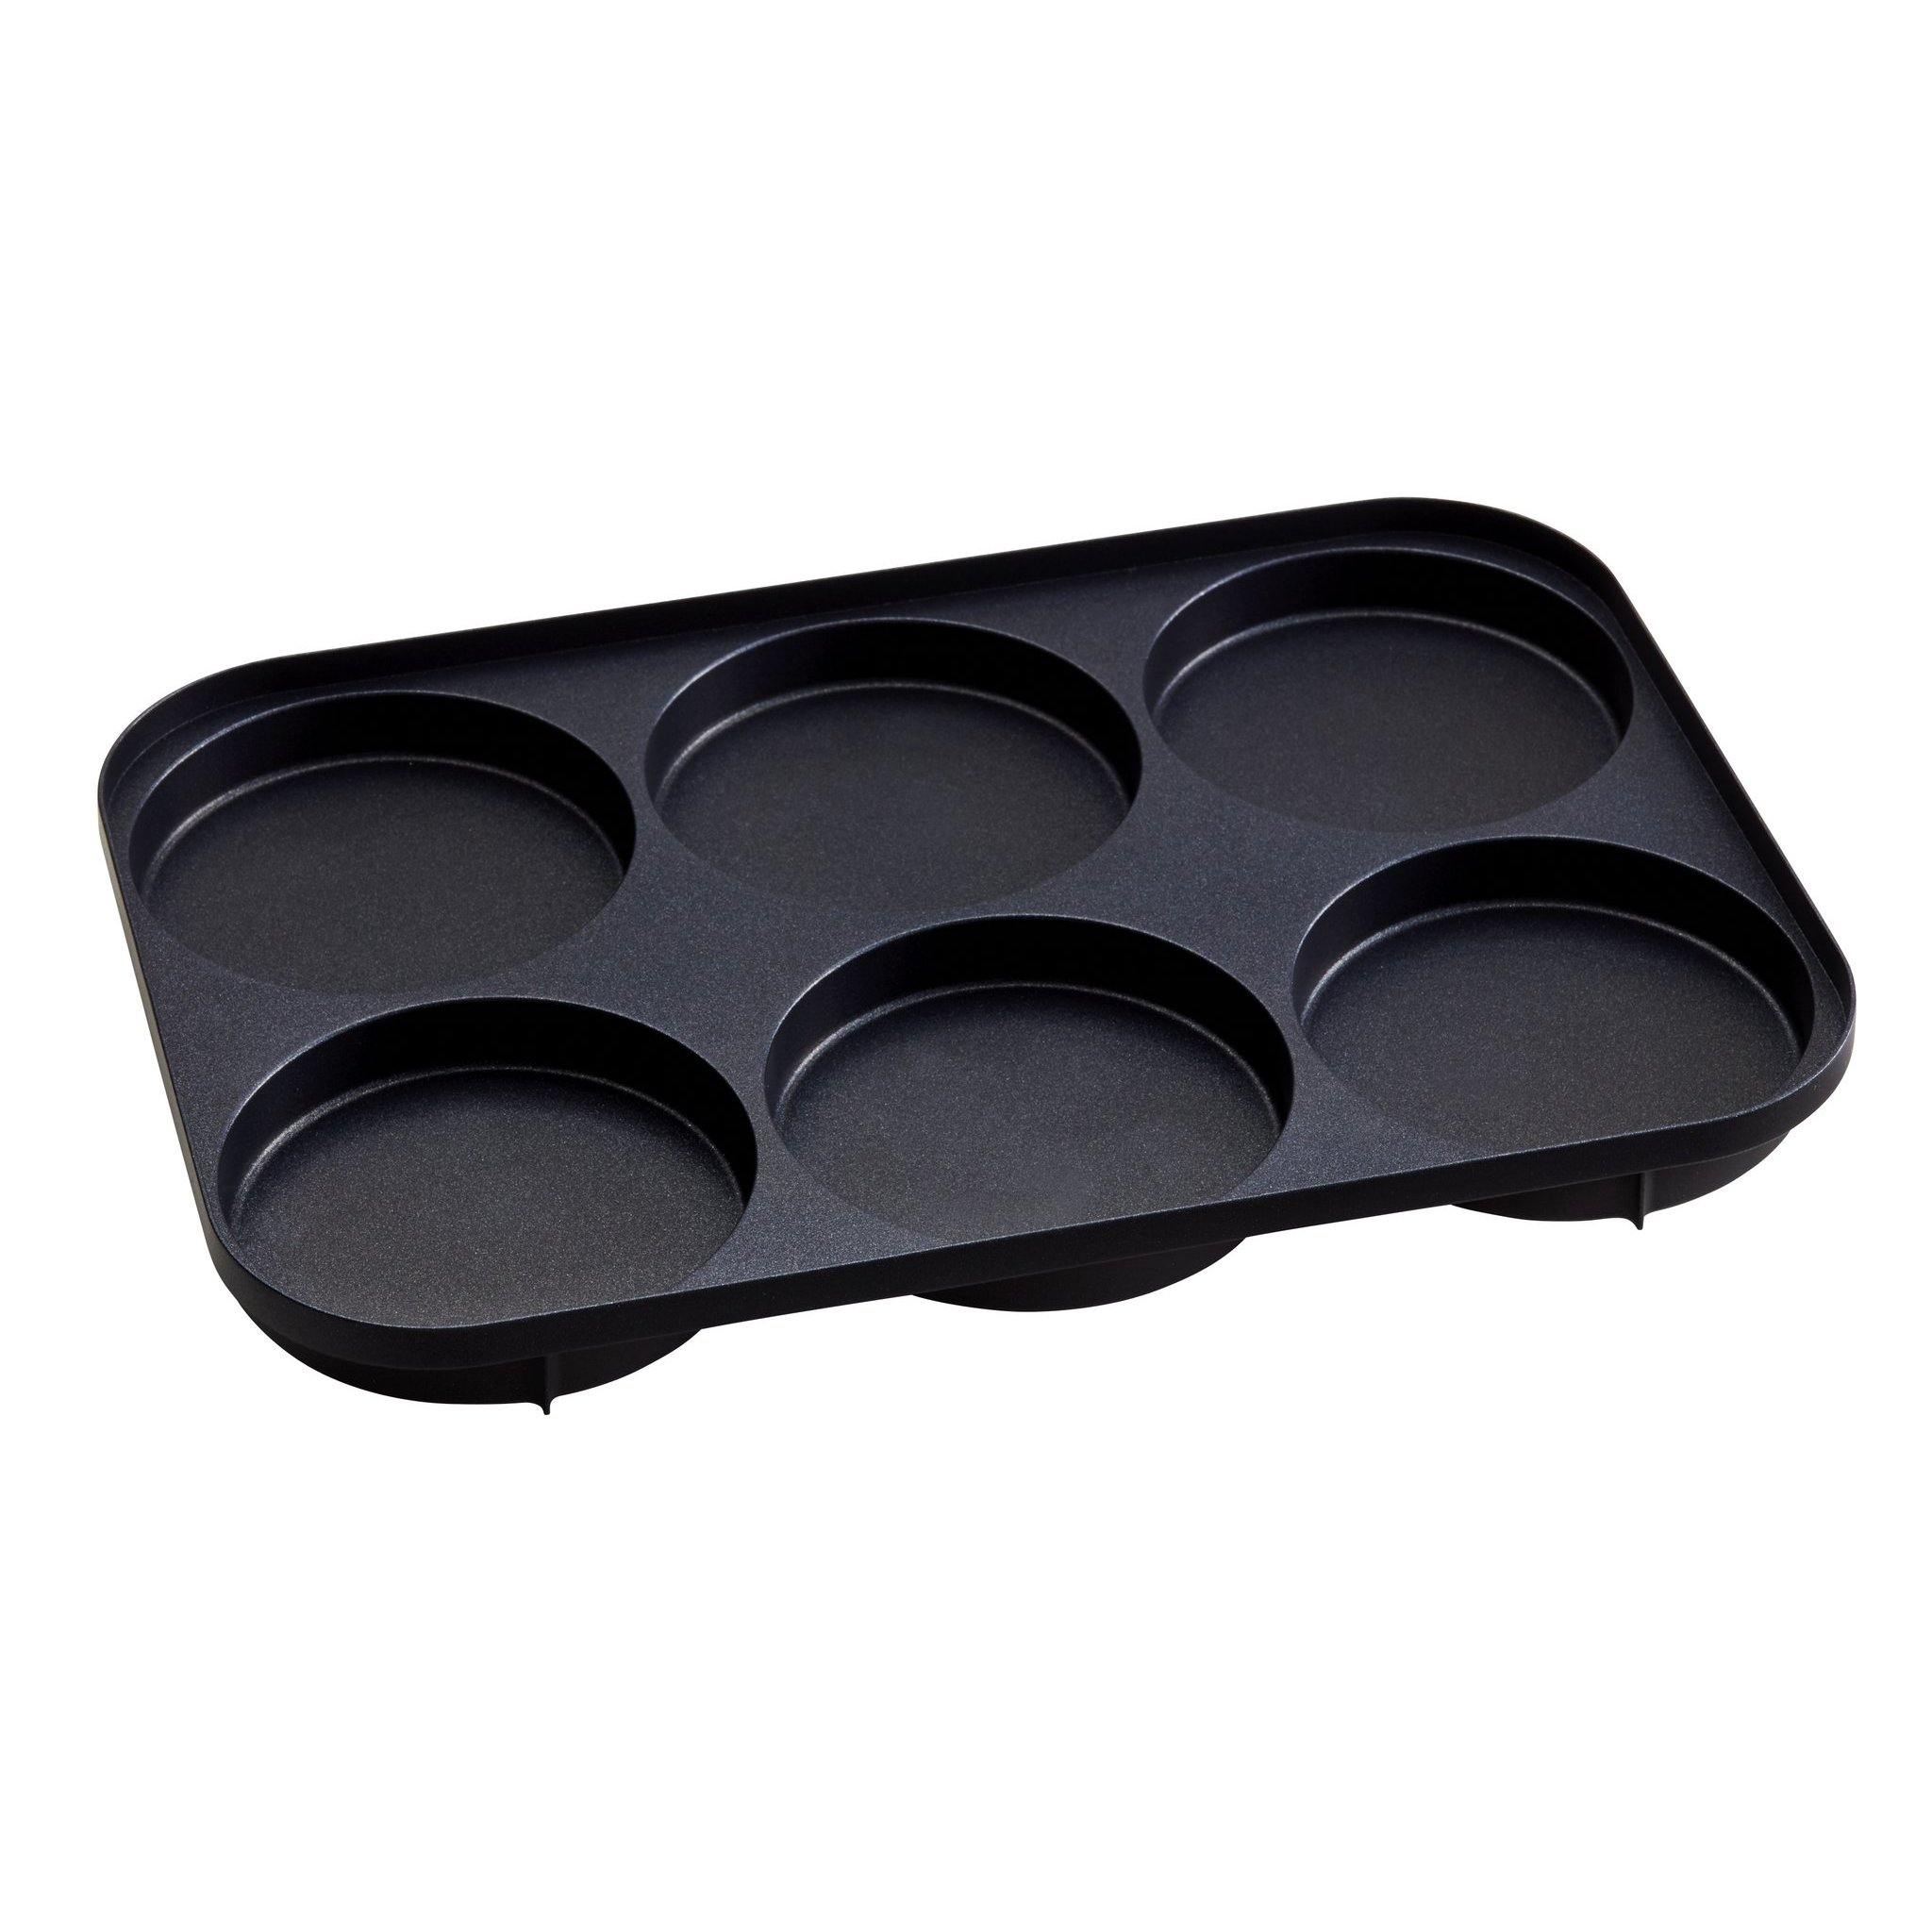 BRUNO Multi-Plate (for Compact Hot Plate)